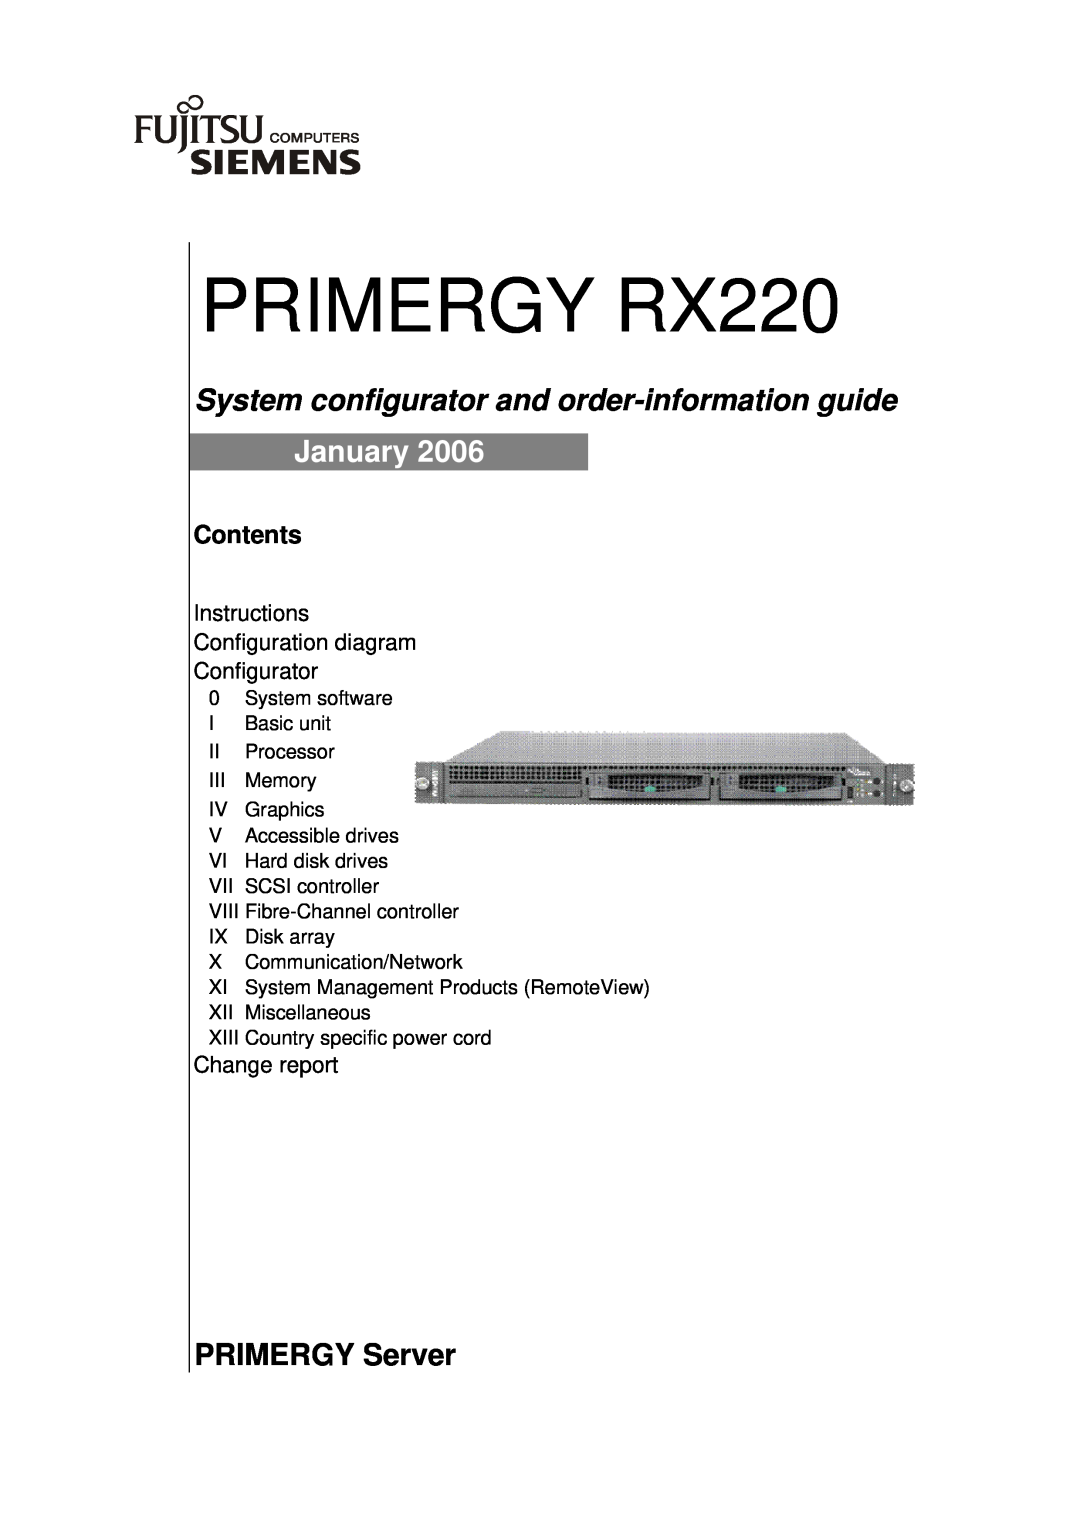 Fujitsu Siemens Computers manual PRIMERGY RX220, System configurator and order-information guide, January, Contents 